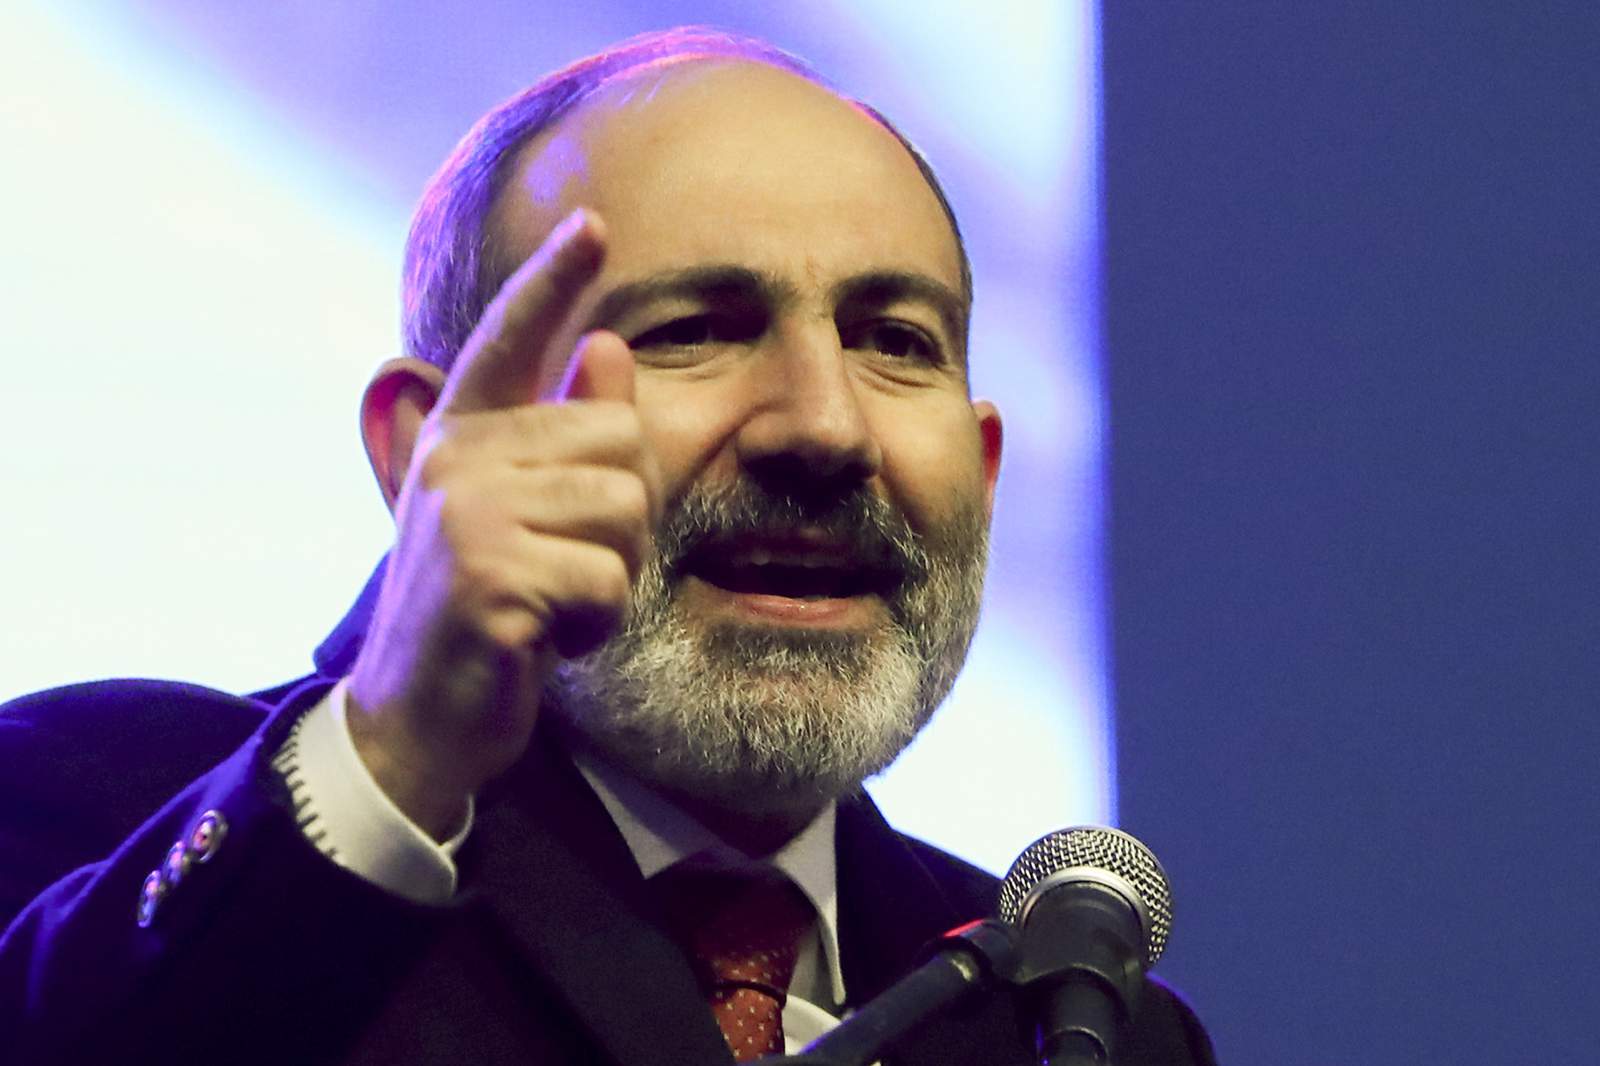 Armenian leader scores political point in spat with military